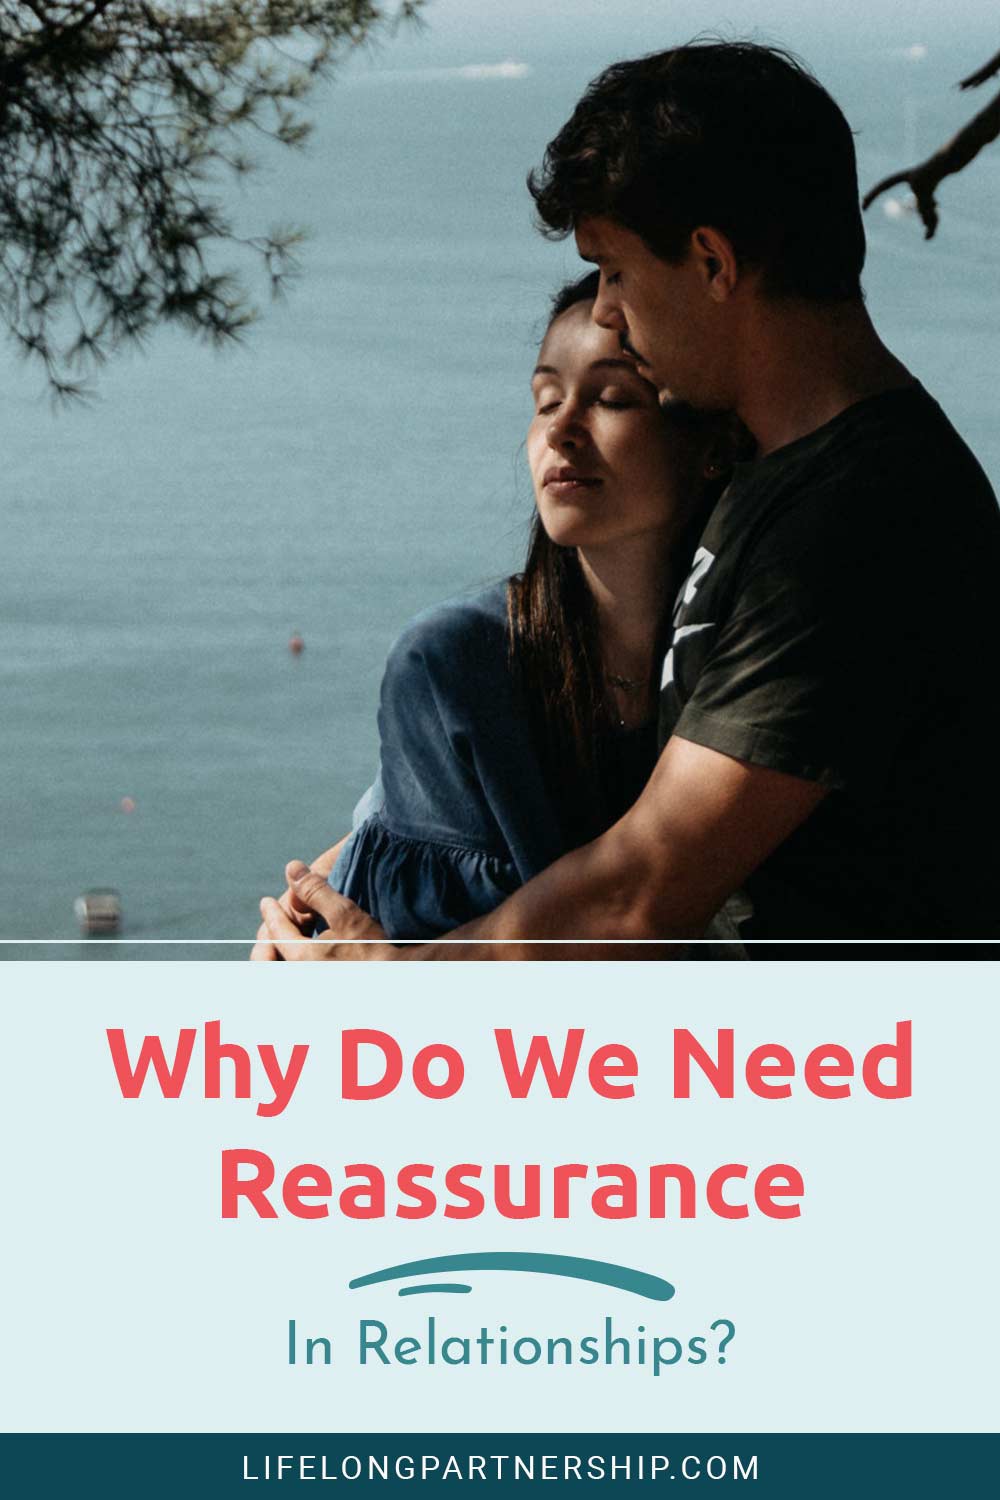 Why Do We Need Reassurance In Relationships?